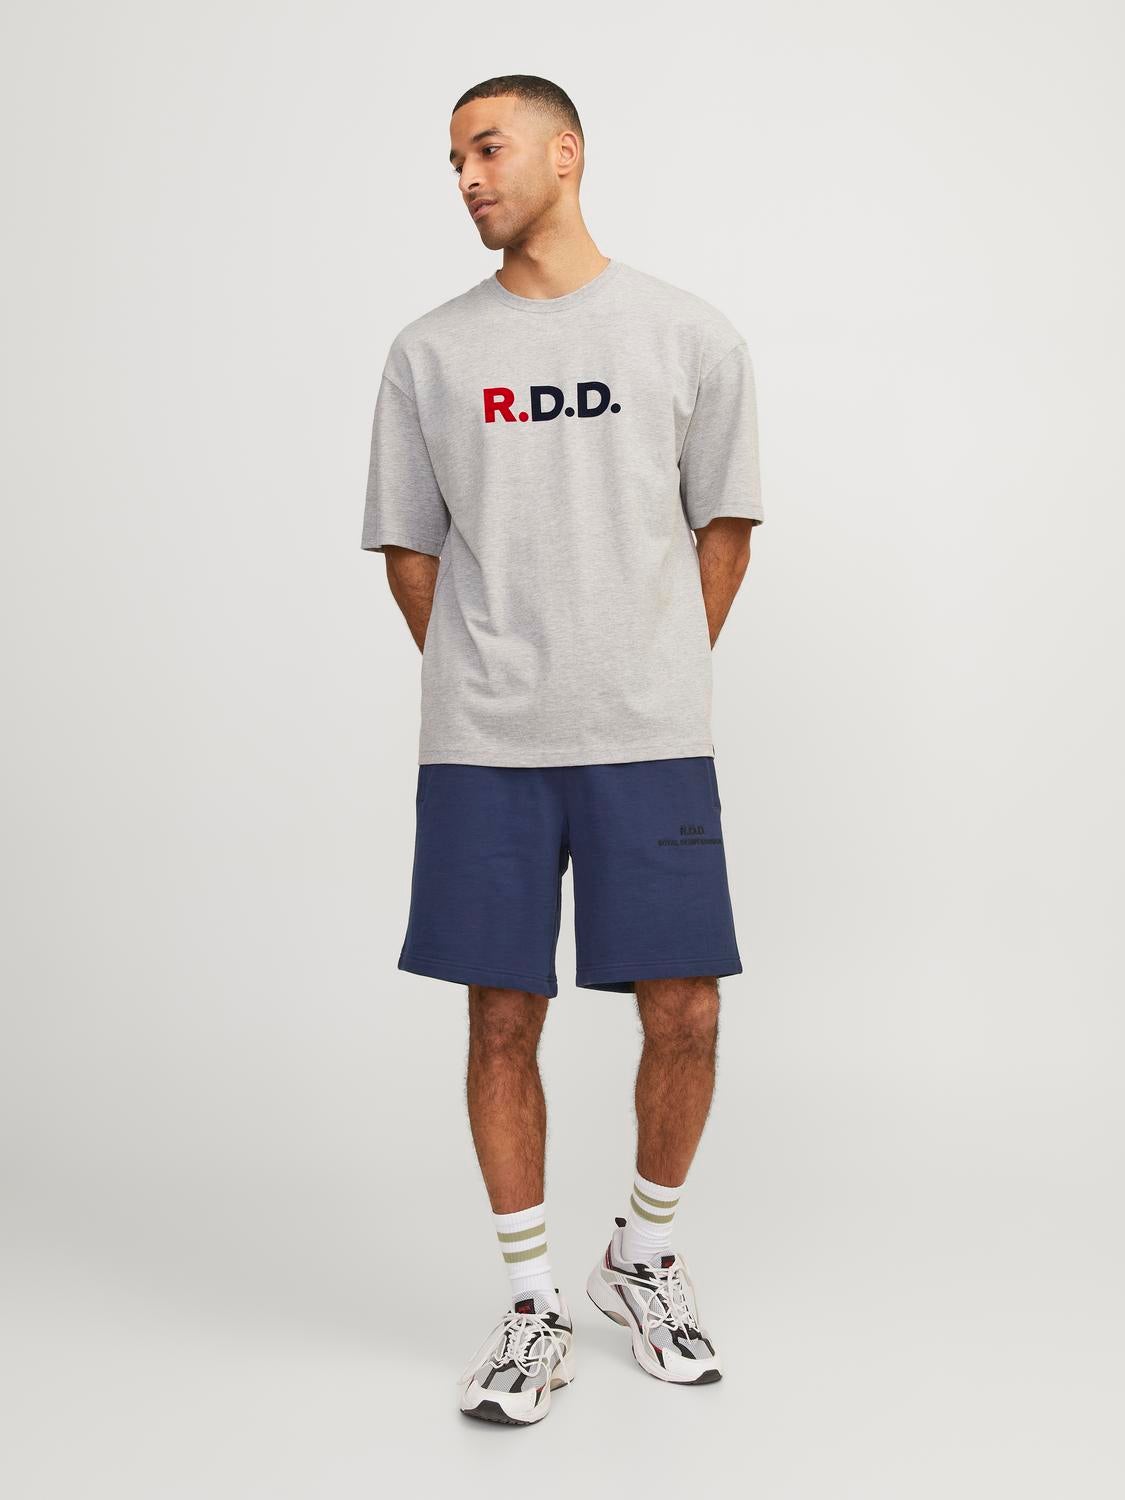 RDD Relaxed Fit Sweatshorts